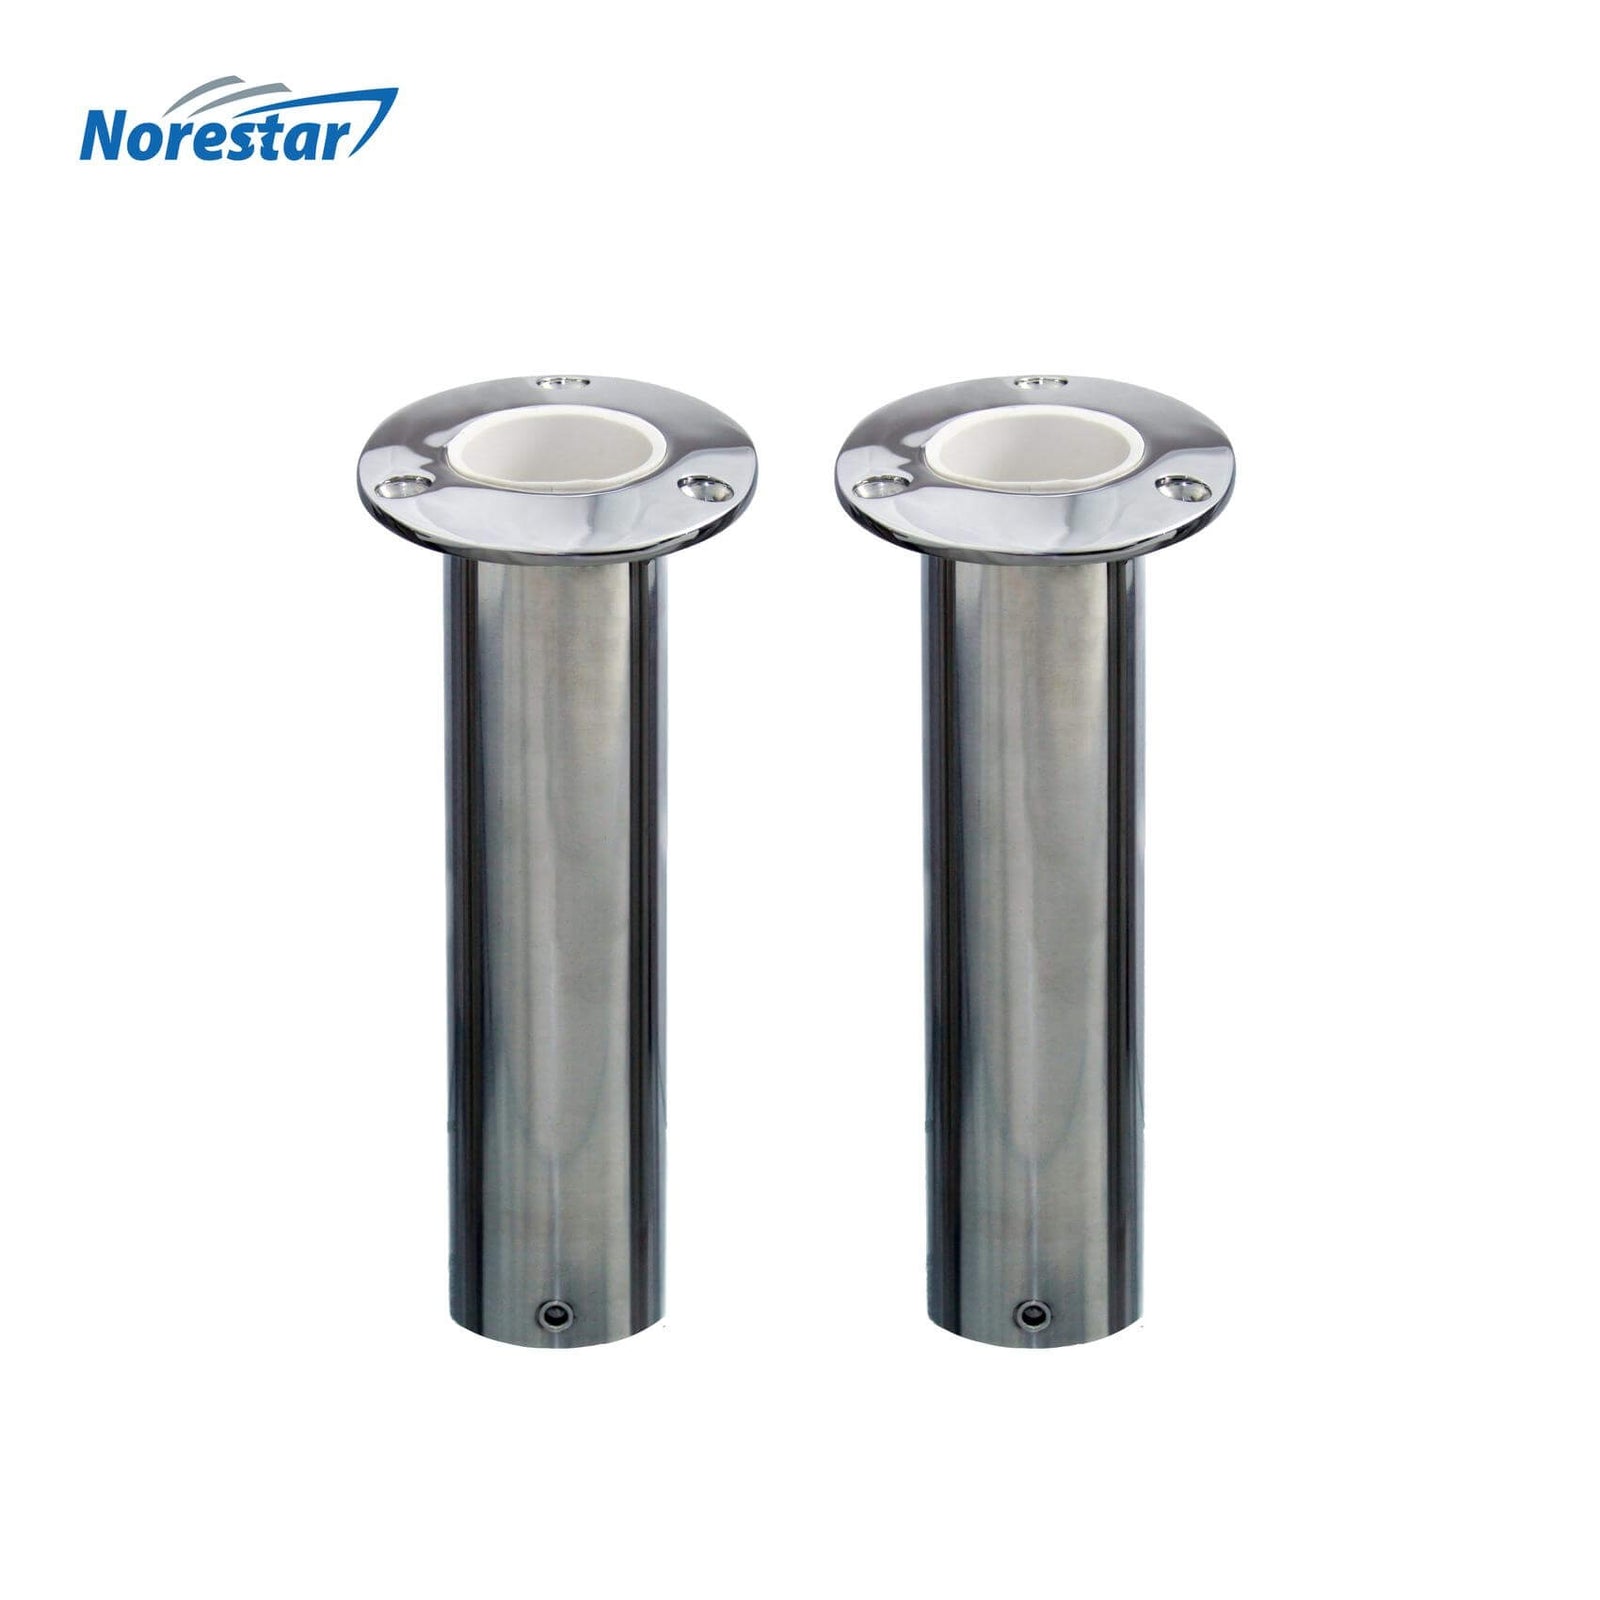 Two Flush Mounted Stainless Steel Rod Holders, Angled 15 Degrees